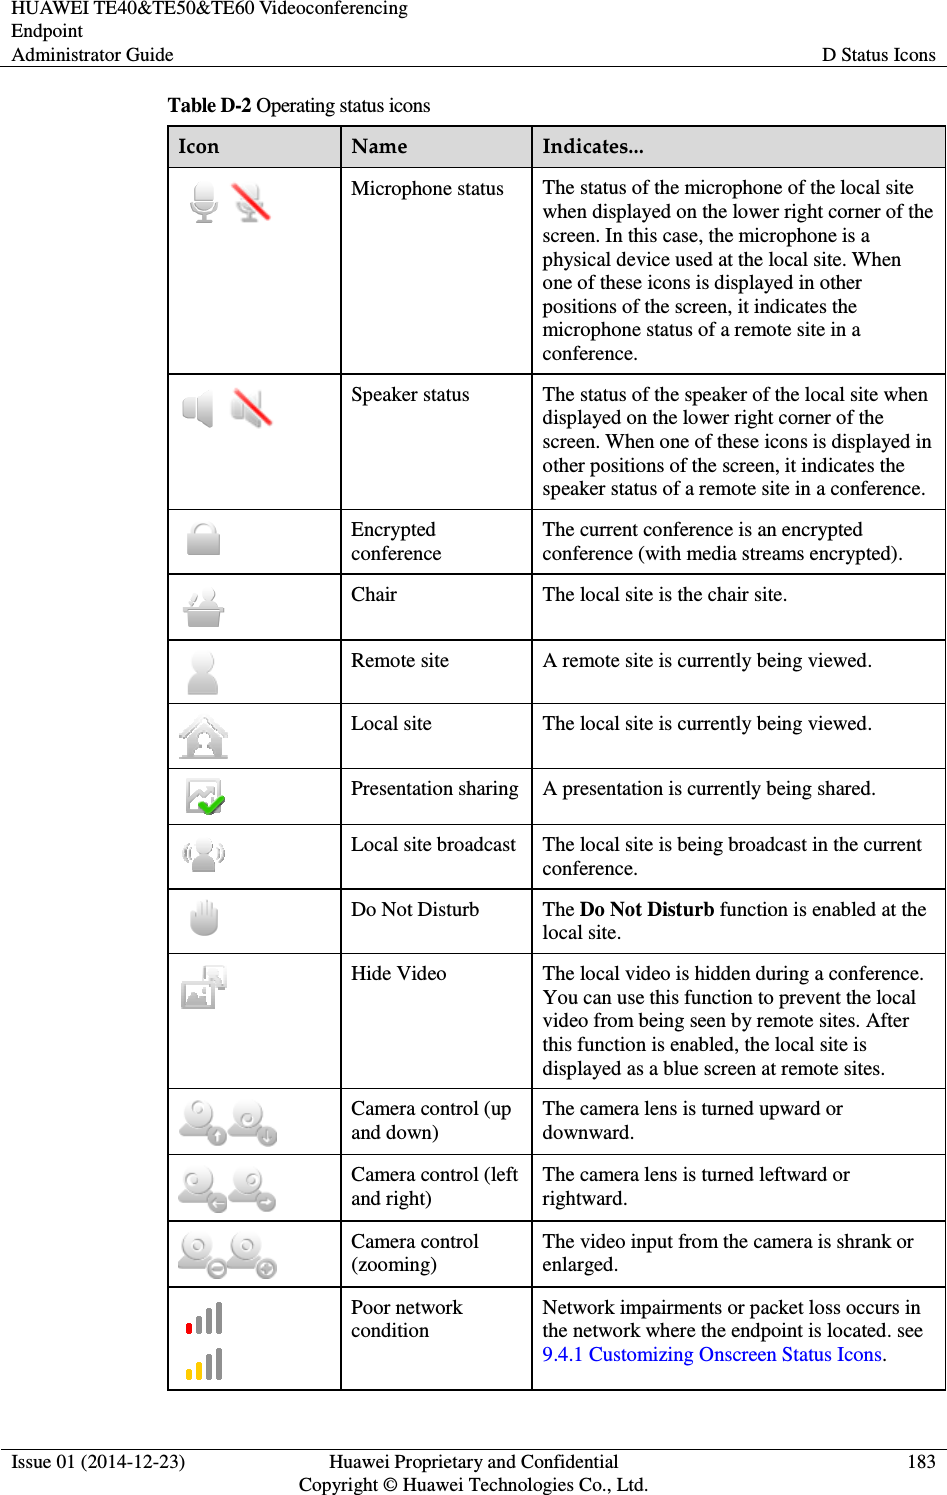 HUAWEI TE40&amp;TE50&amp;TE60 Videoconferencing Endpoint Administrator Guide  D Status Icons  Issue 01 (2014-12-23)  Huawei Proprietary and Confidential                                     Copyright © Huawei Technologies Co., Ltd. 183  Table D-2 Operating status icons Icon  Name  Indicates...  Microphone status  The status of the microphone of the local site when displayed on the lower right corner of the screen. In this case, the microphone is a physical device used at the local site. When one of these icons is displayed in other positions of the screen, it indicates the microphone status of a remote site in a conference.  Speaker status  The status of the speaker of the local site when displayed on the lower right corner of the screen. When one of these icons is displayed in other positions of the screen, it indicates the speaker status of a remote site in a conference.  Encrypted conference The current conference is an encrypted conference (with media streams encrypted).  Chair  The local site is the chair site.  Remote site  A remote site is currently being viewed.  Local site  The local site is currently being viewed.  Presentation sharing  A presentation is currently being shared.  Local site broadcast  The local site is being broadcast in the current conference.  Do Not Disturb  The Do Not Disturb function is enabled at the local site.  Hide Video  The local video is hidden during a conference. You can use this function to prevent the local video from being seen by remote sites. After this function is enabled, the local site is displayed as a blue screen at remote sites.  Camera control (up and down) The camera lens is turned upward or downward.  Camera control (left and right) The camera lens is turned leftward or rightward.  Camera control (zooming) The video input from the camera is shrank or enlarged.   Poor network condition Network impairments or packet loss occurs in the network where the endpoint is located. see 9.4.1 Customizing Onscreen Status Icons. 